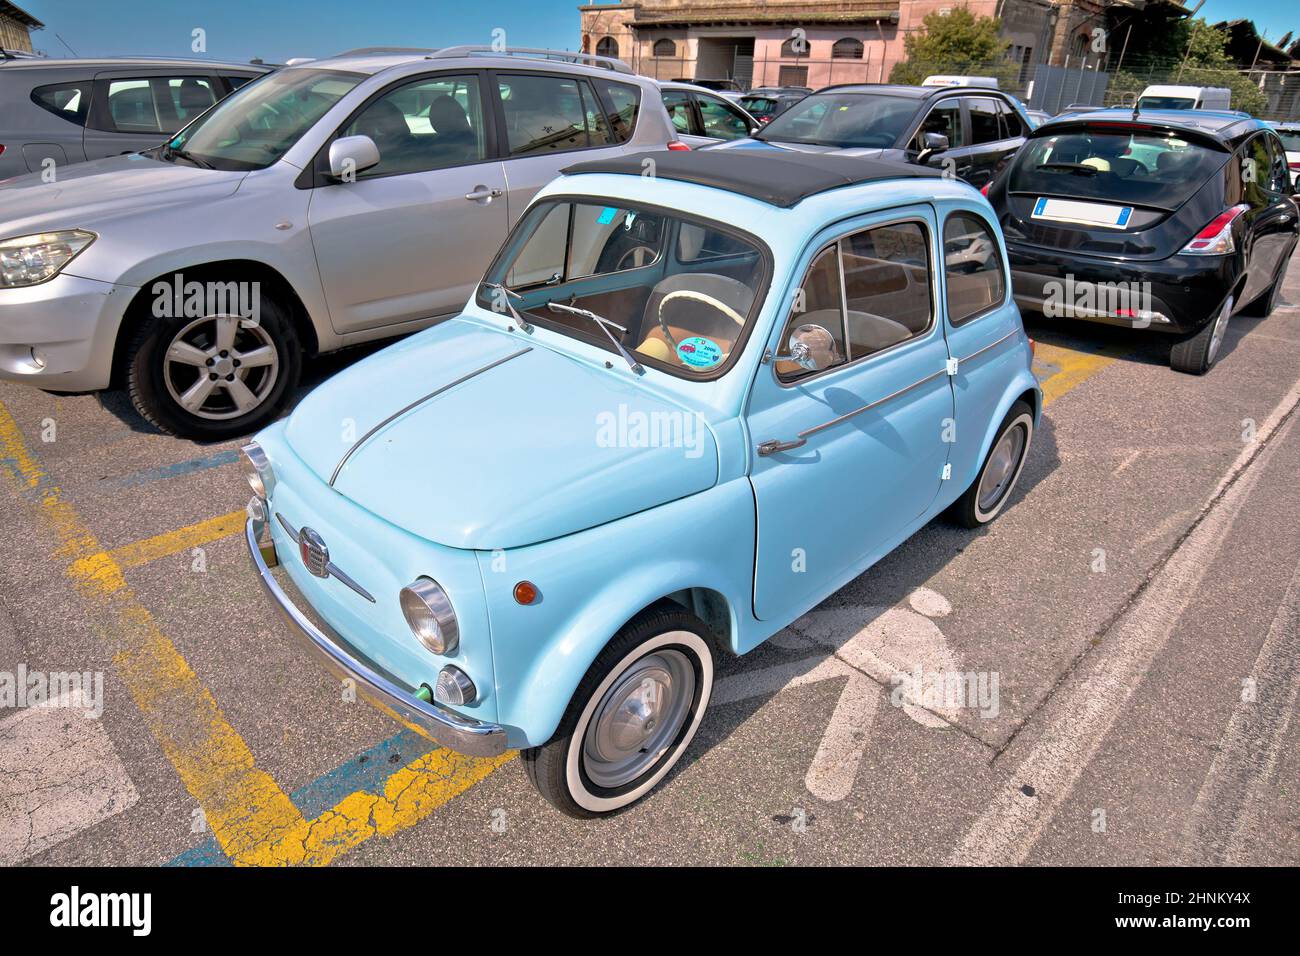 Iconic italian car Fiat 500 in turquoise blue color view. Stock Photo